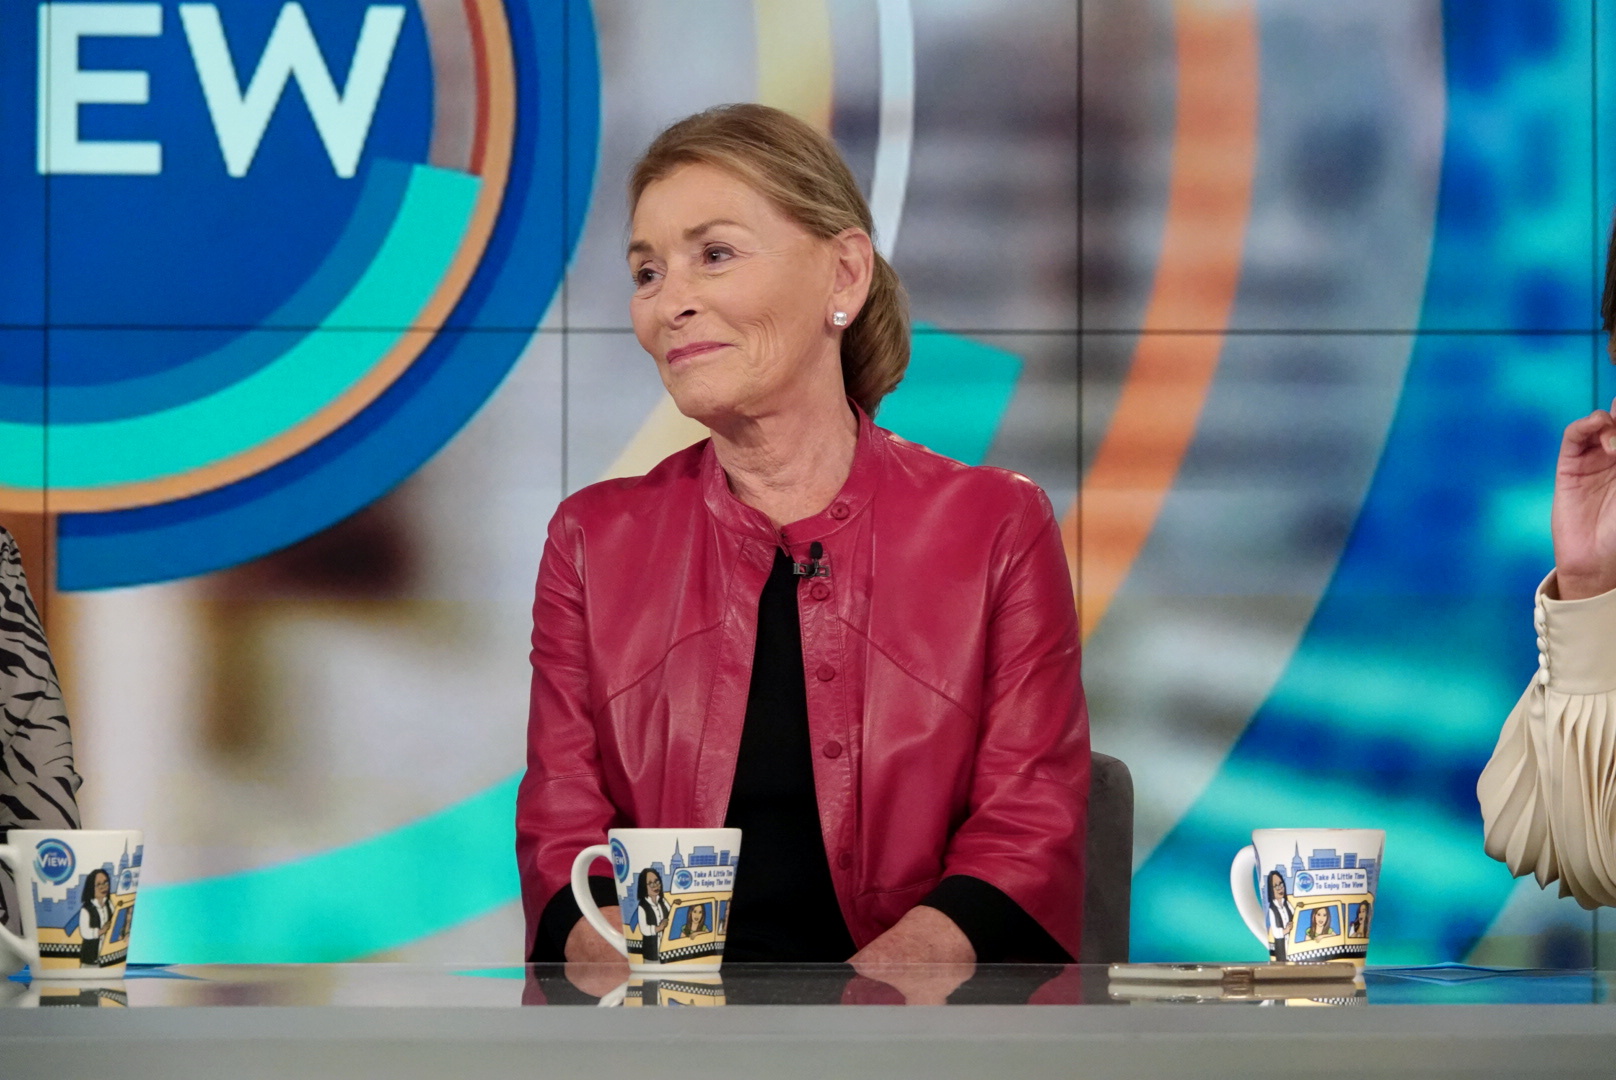 PHOTO: Judge Judith Sheindlin discusses her endorsement of former New York City Mayor Michael Bloomberg for president during her daytime exclusive appearance on "The View," Jan. 6, 2020.